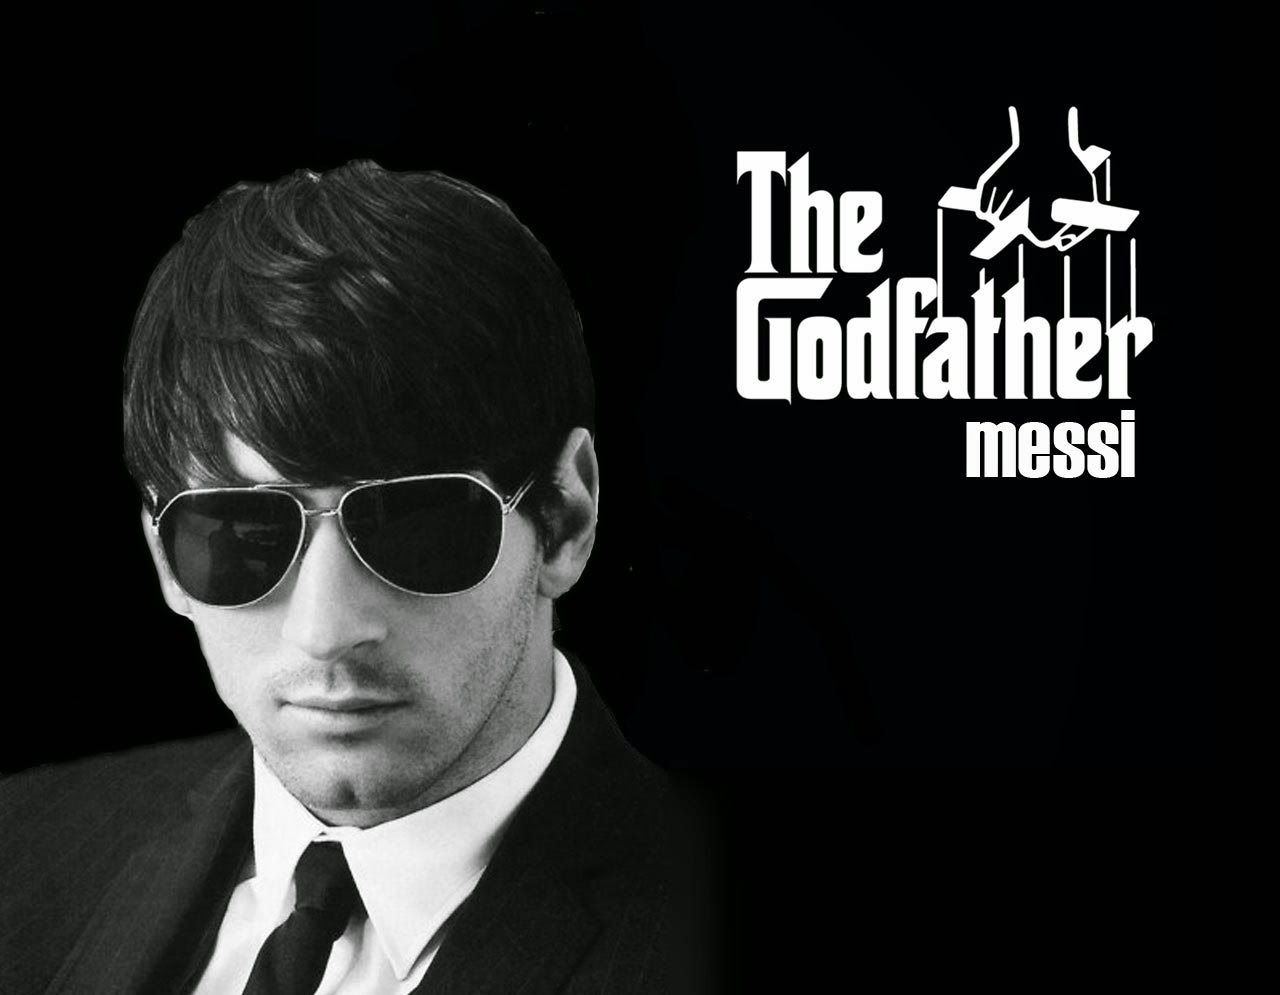 Messi-2012-The-God-Father.jpg